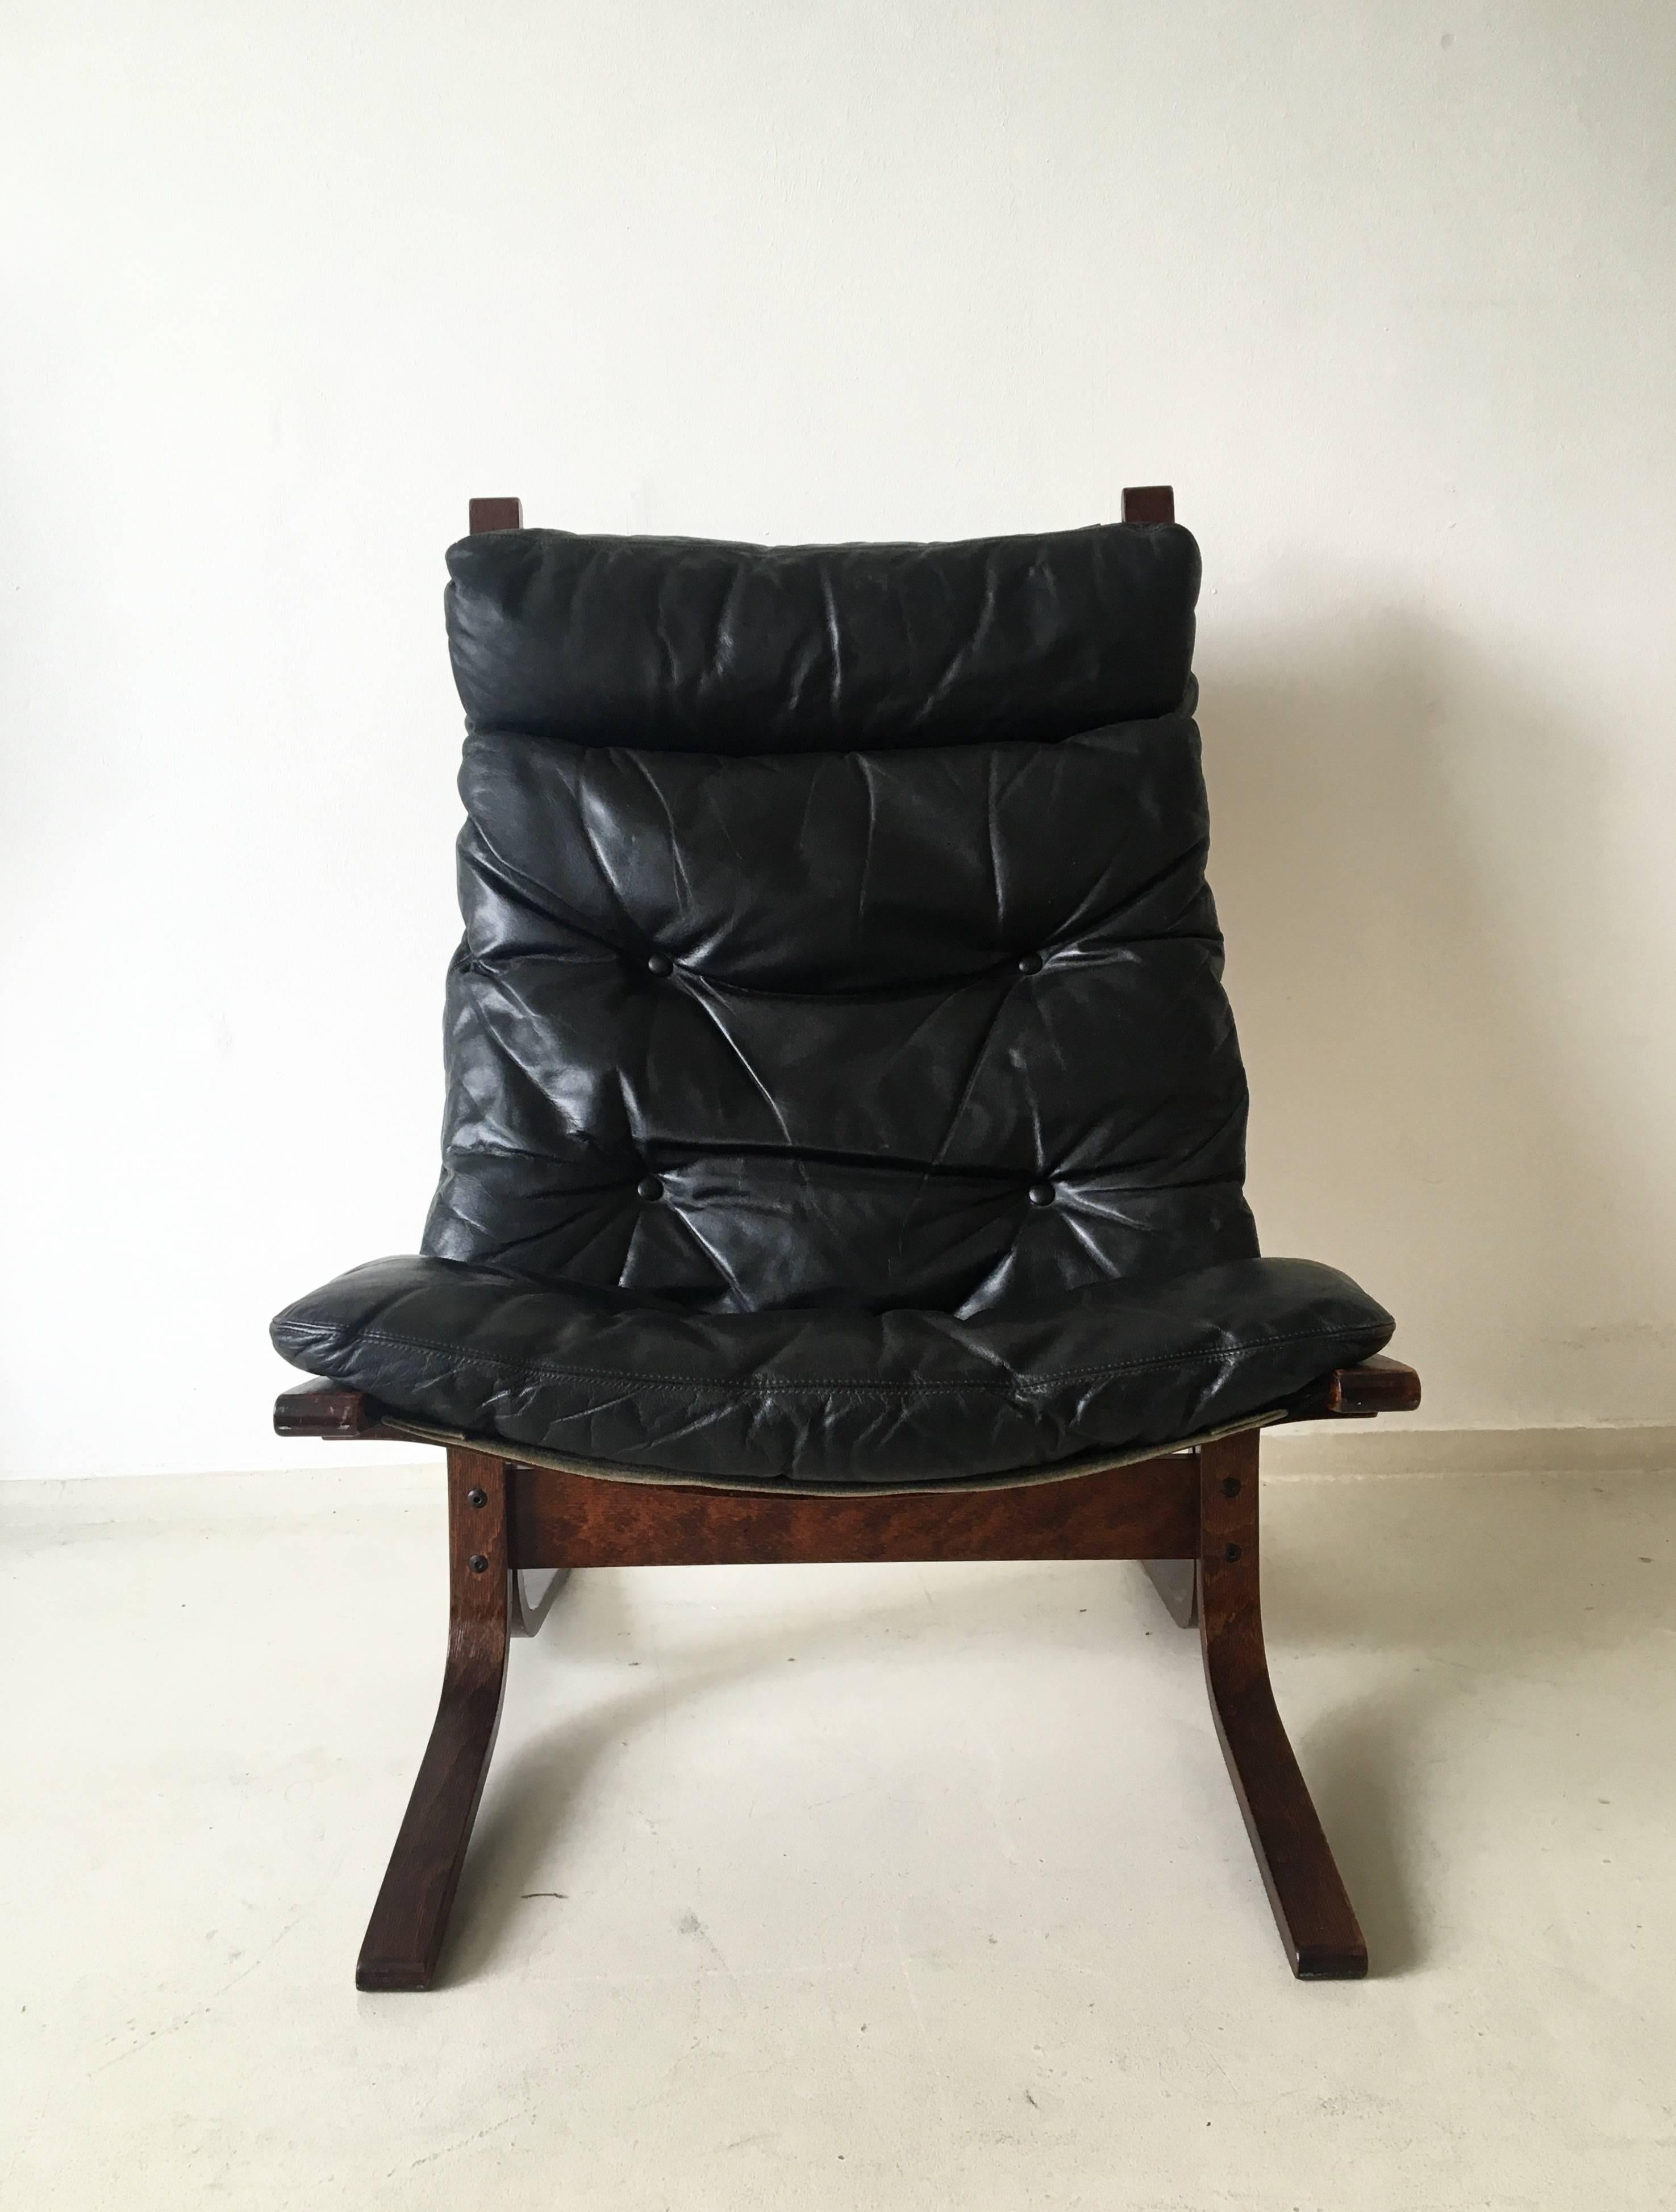 This magnificent chair and ottoman were designed by Ingmar Relling, circa the 1960s in Norway. They feature a dark bentwood frame with very thick and comfortable black leather cushions. Both products are labeled with the manufacturers sticker. The